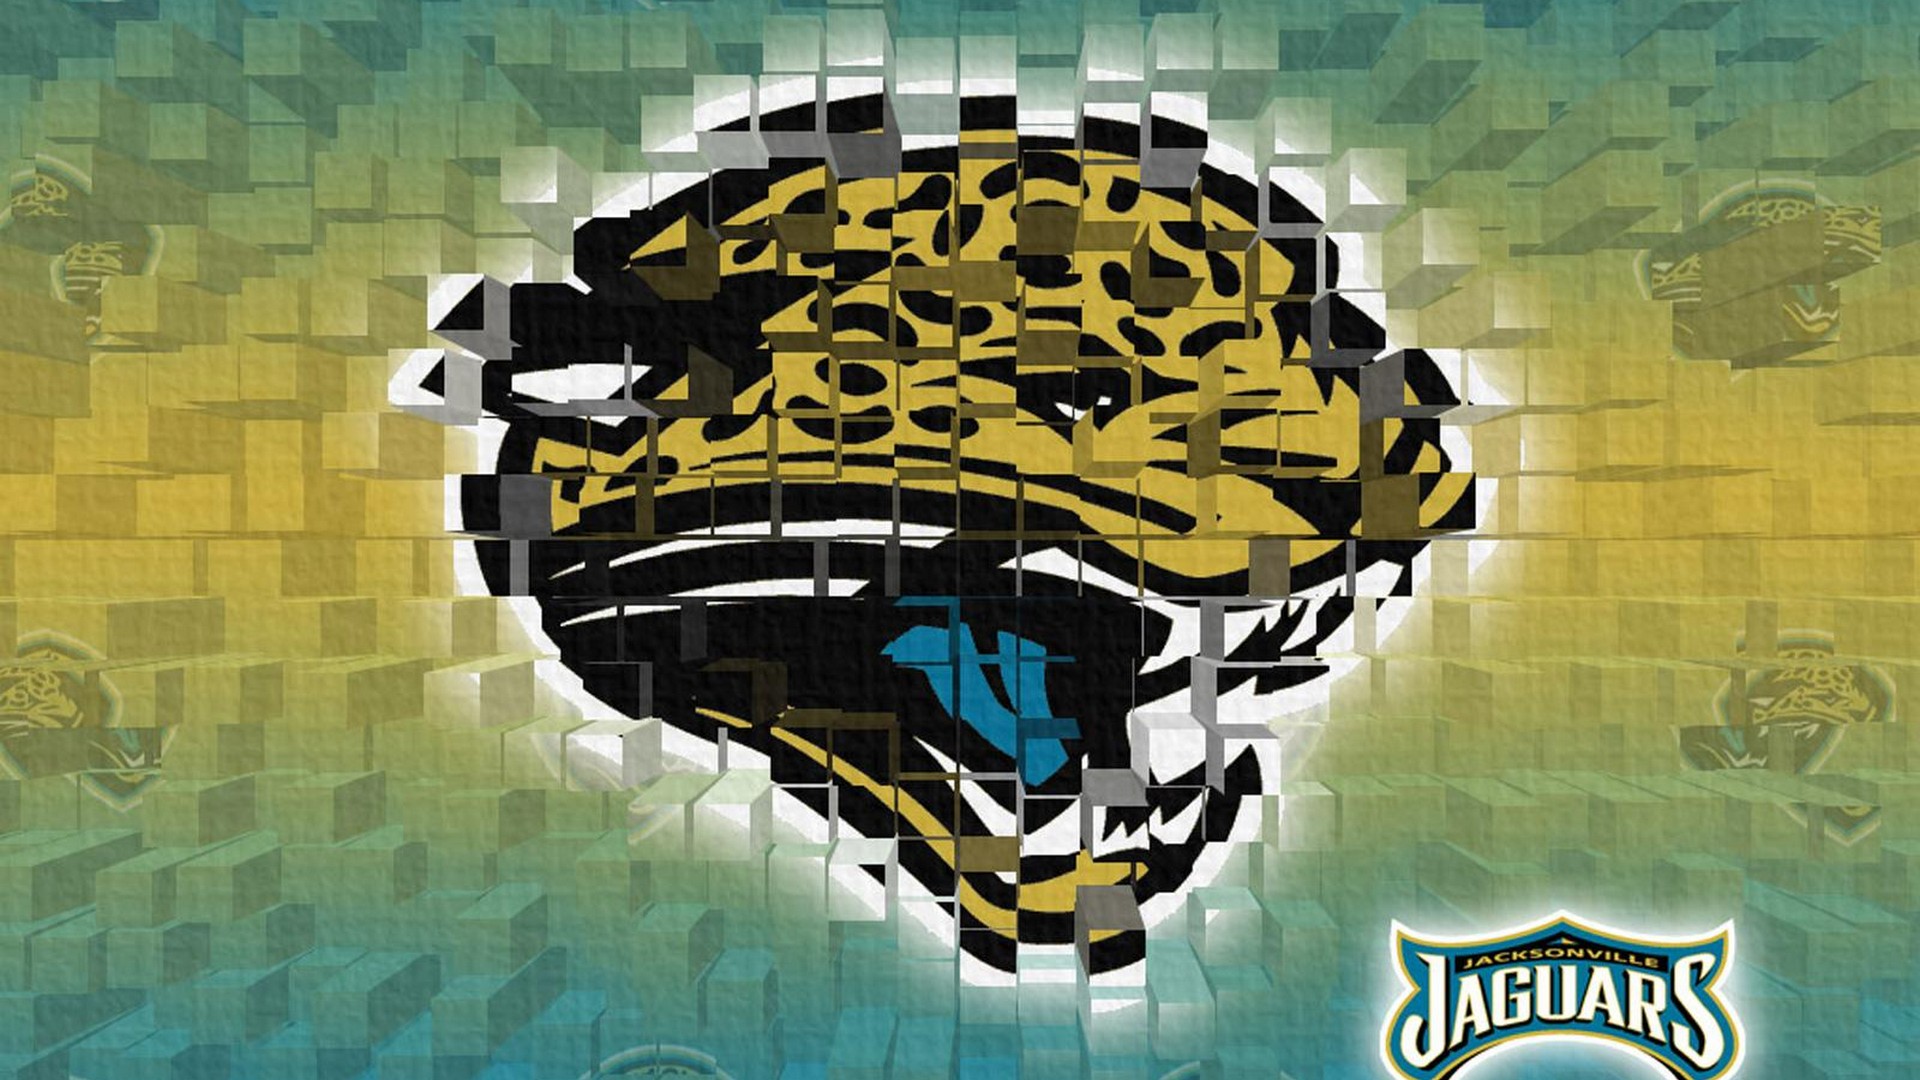 Desktop Wallpapers Jacksonville Jaguars With high-resolution 1920X1080 pixel. Download and set as wallpaper for Desktop Computer, Apple iPhone X, XS Max, XR, 8, 7, 6, SE, iPad, Android